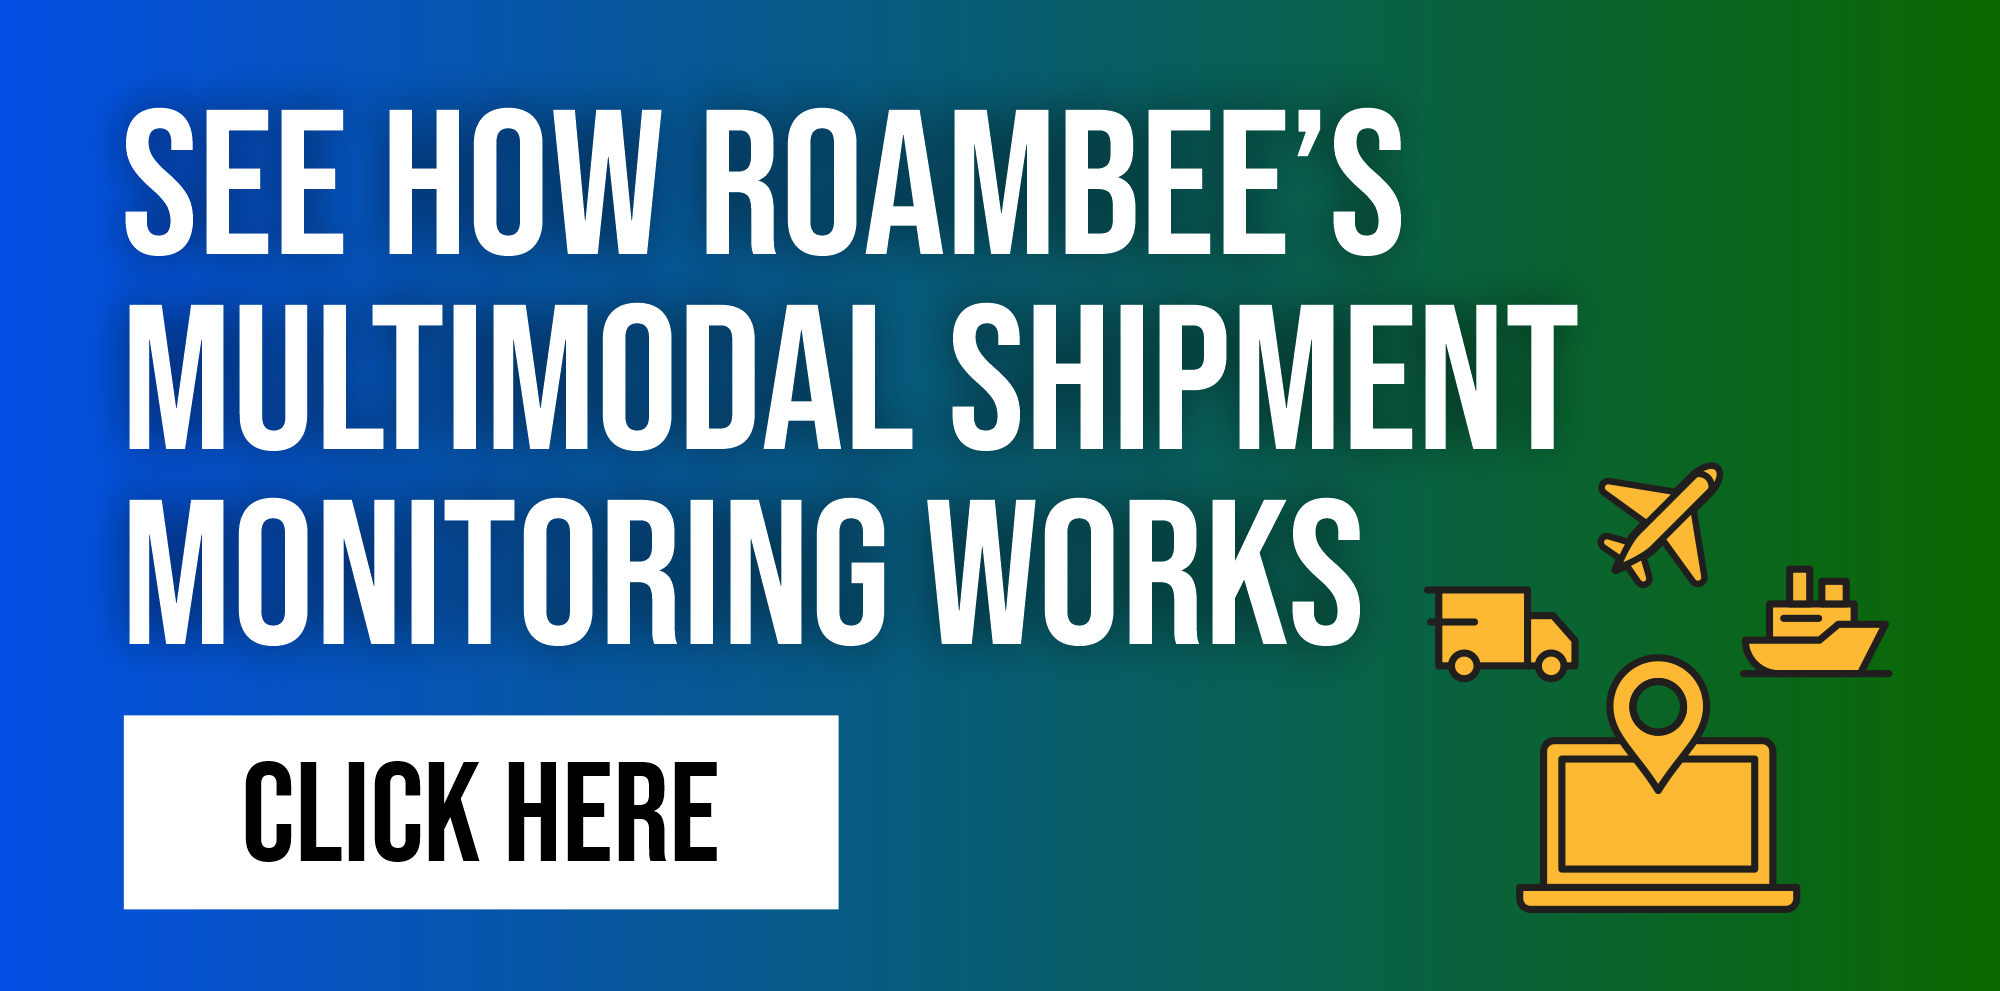 Intermodal Shipment Tracking and Multimodal Shipment Monitoring with Roambee